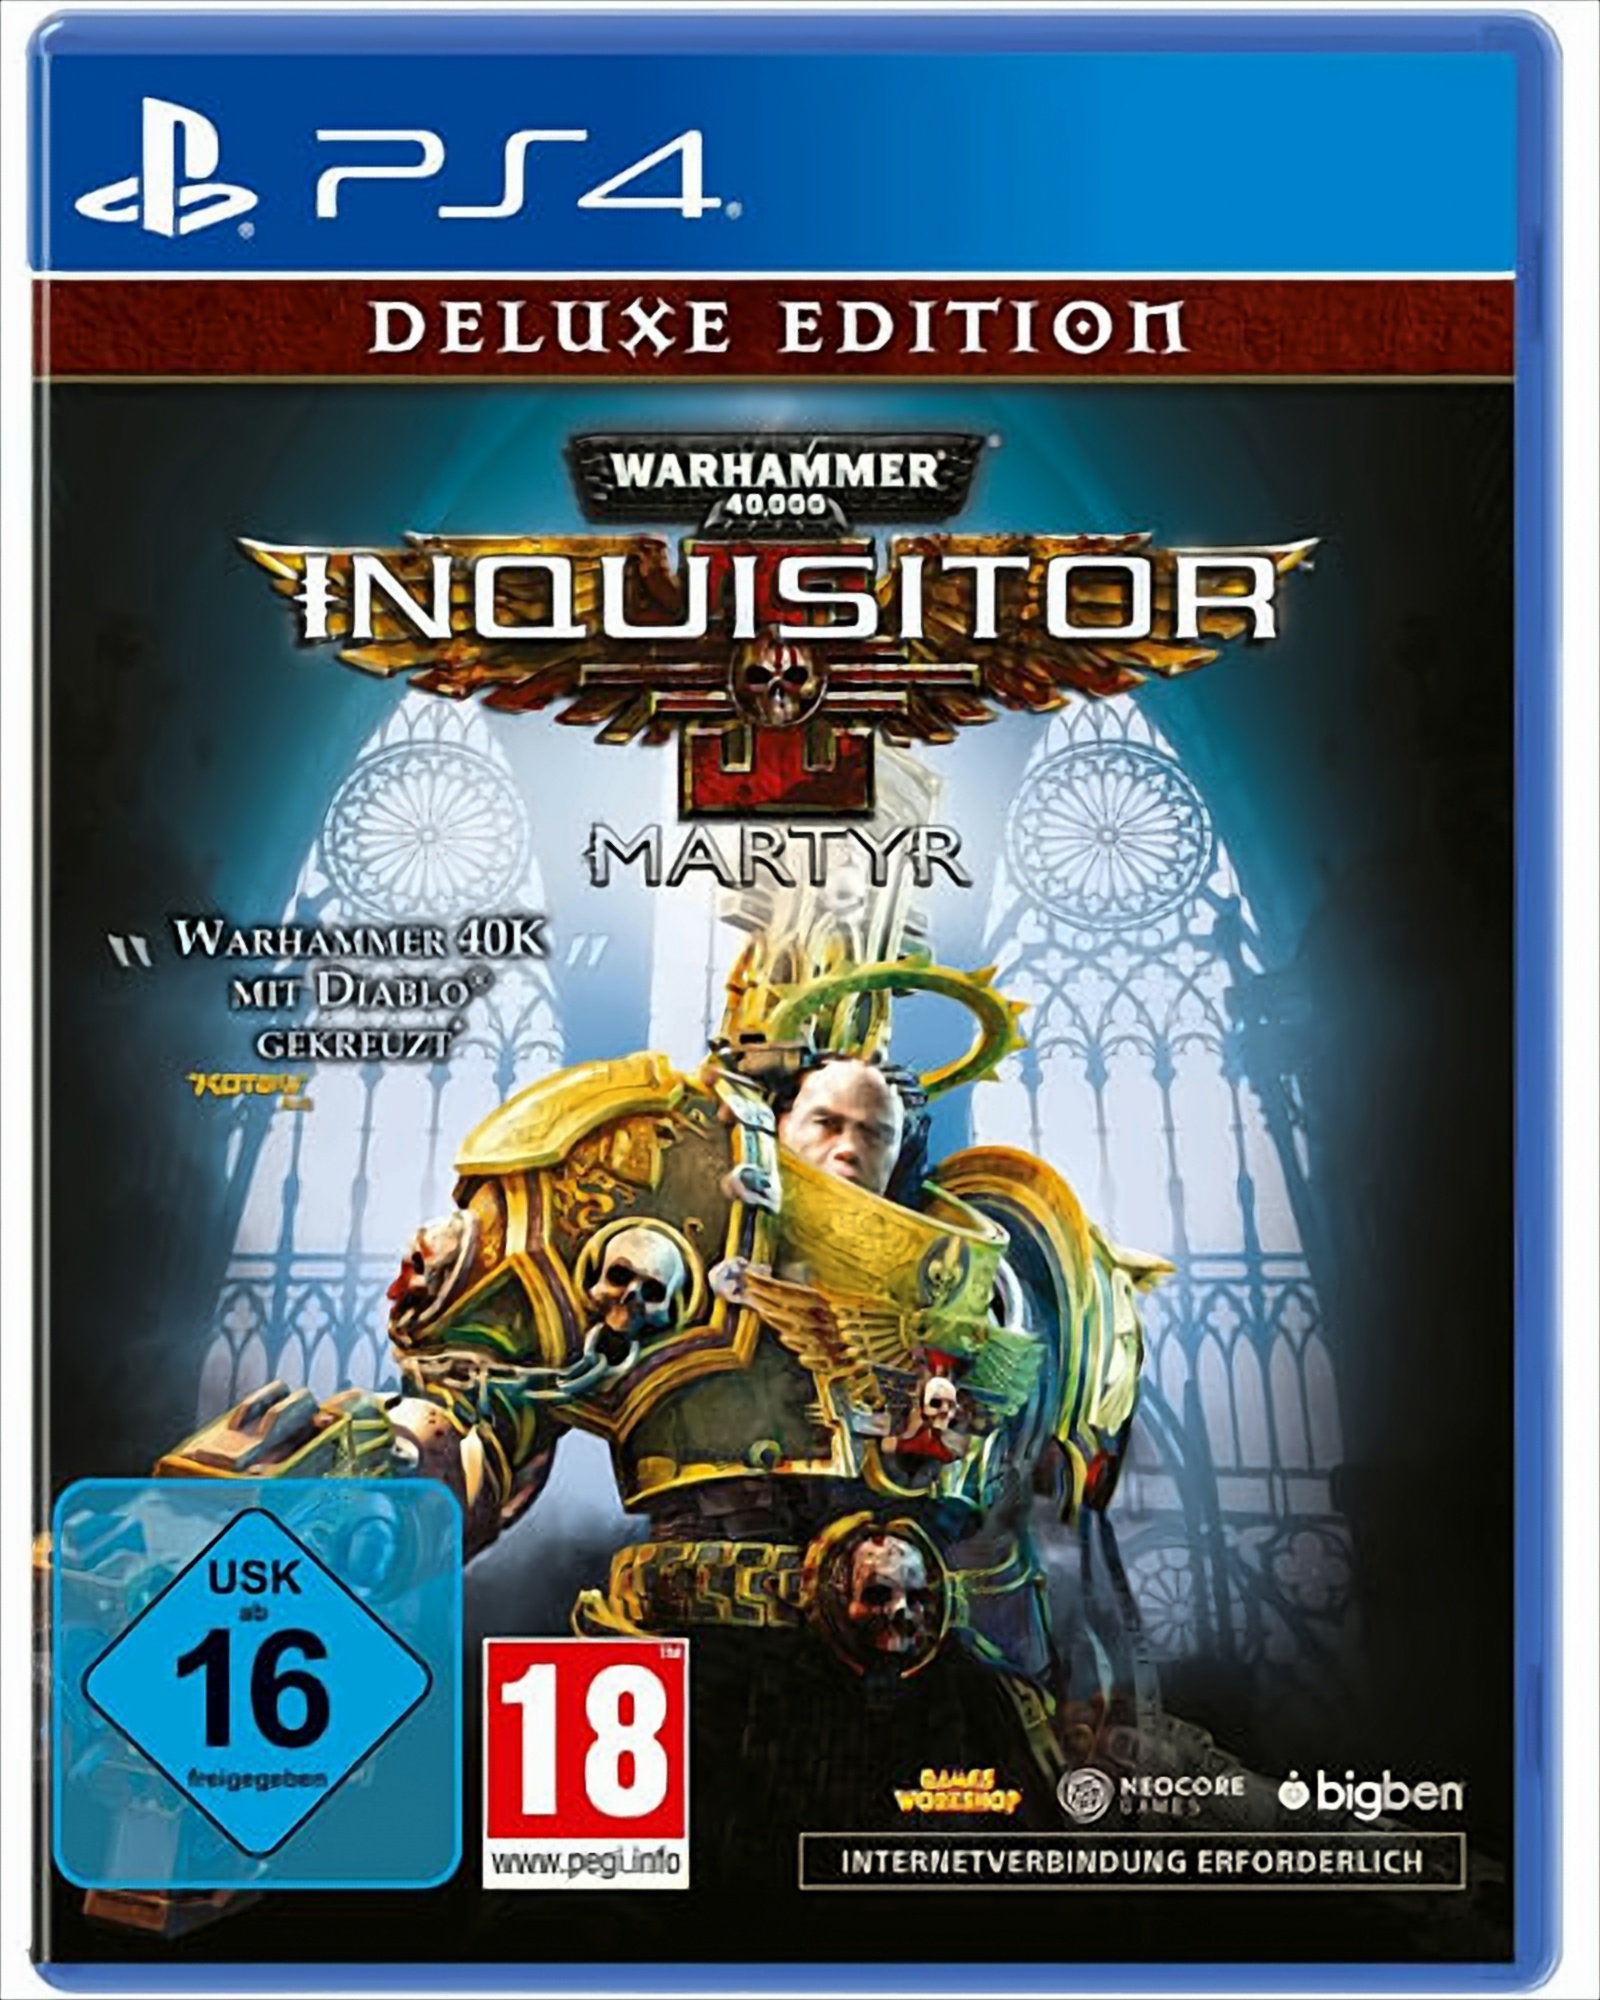 Warhammer 40.000 - Inquisitor PS4 Edition DeLuxe 4] Martyr [PlayStation 